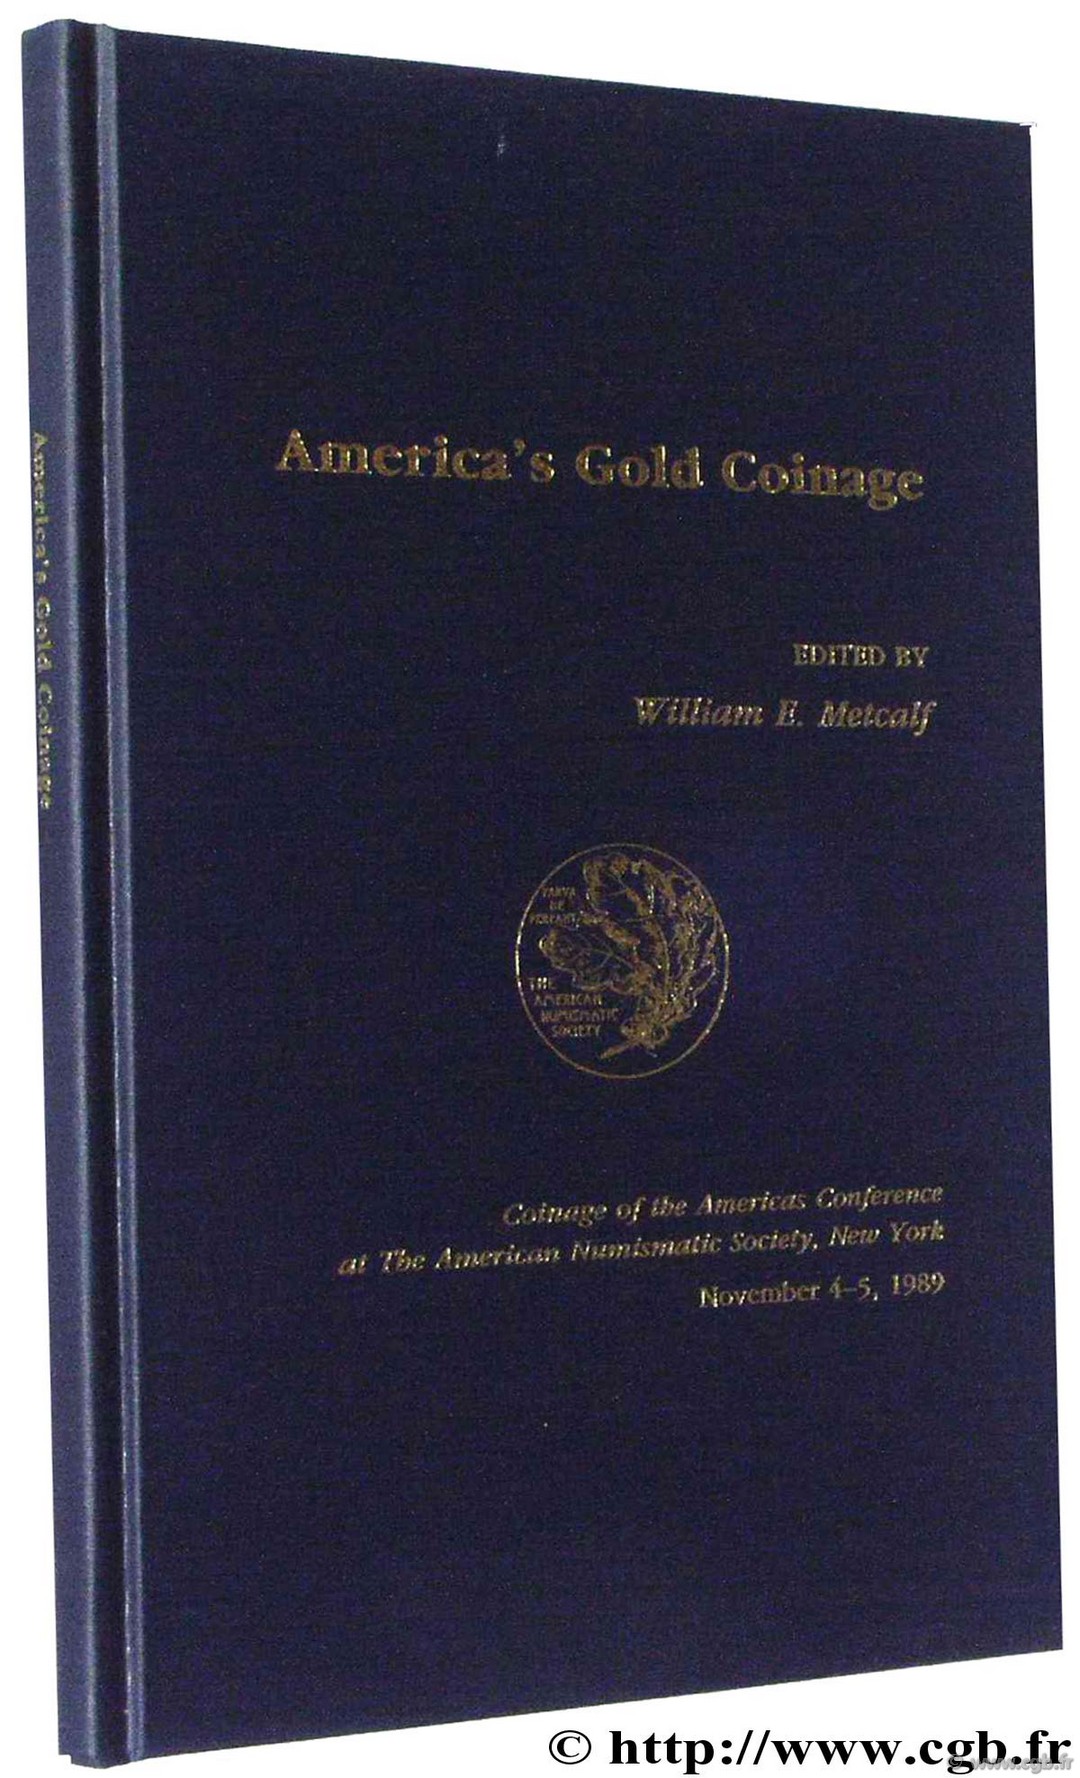 America s gold coinage, coinage of the americas conférence at the American Numismatic Society, New York November 4-5, 1989 